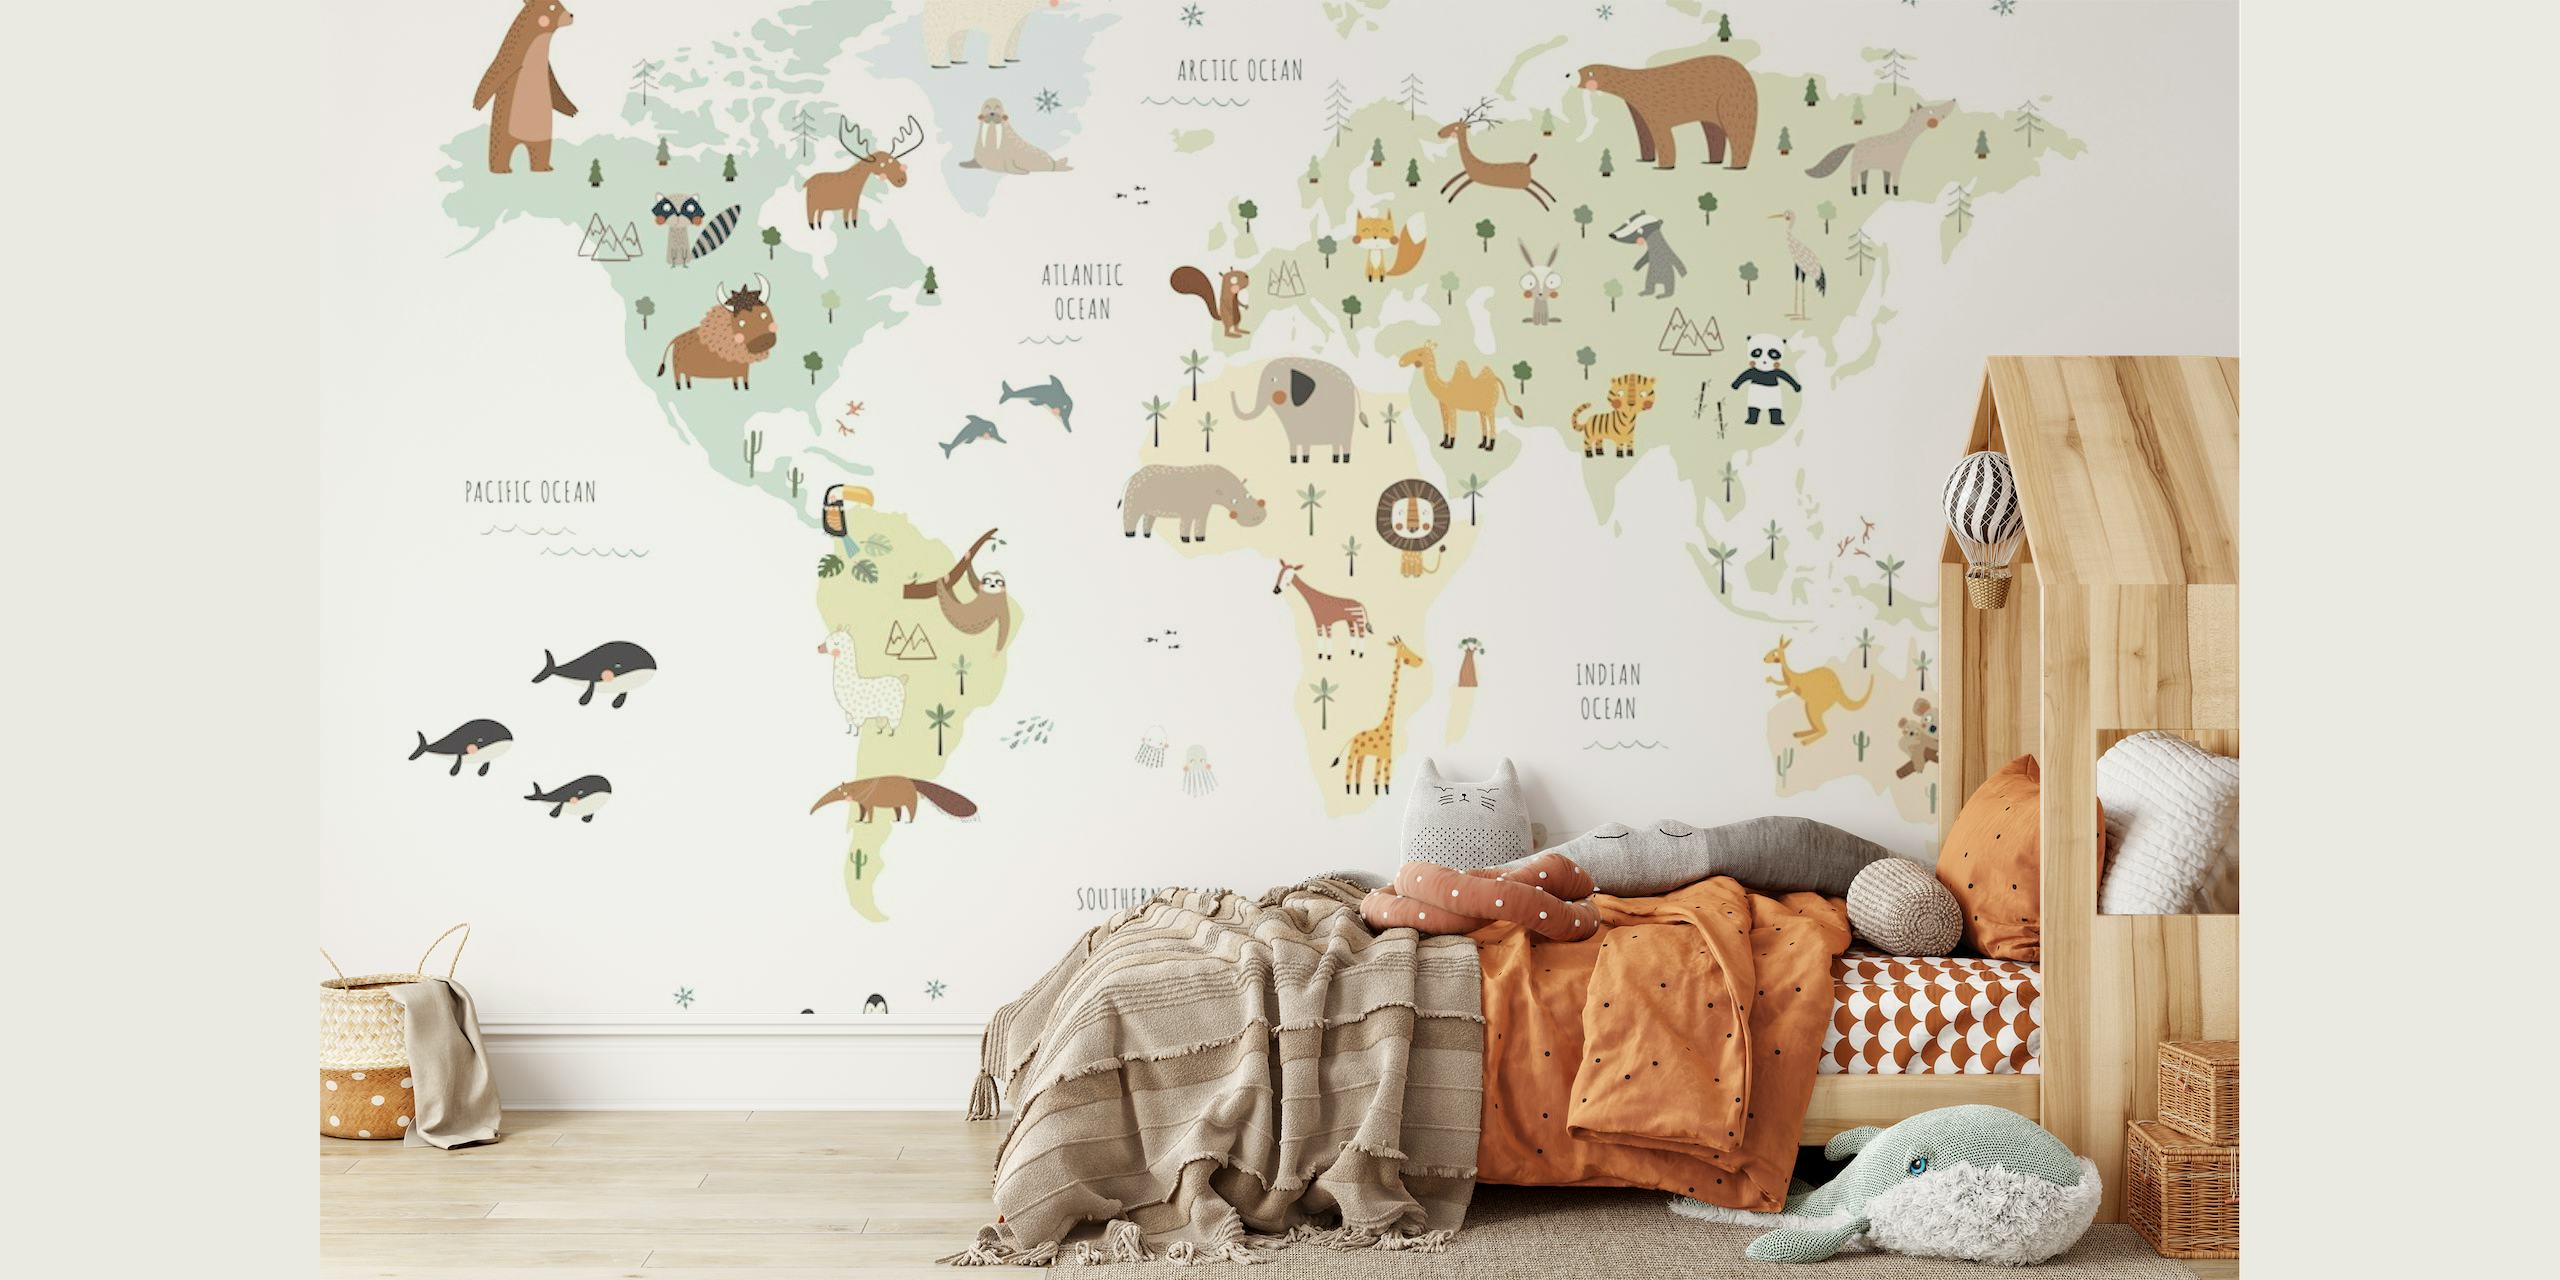 Illustrated world map wall mural with colorful animals representing different regions